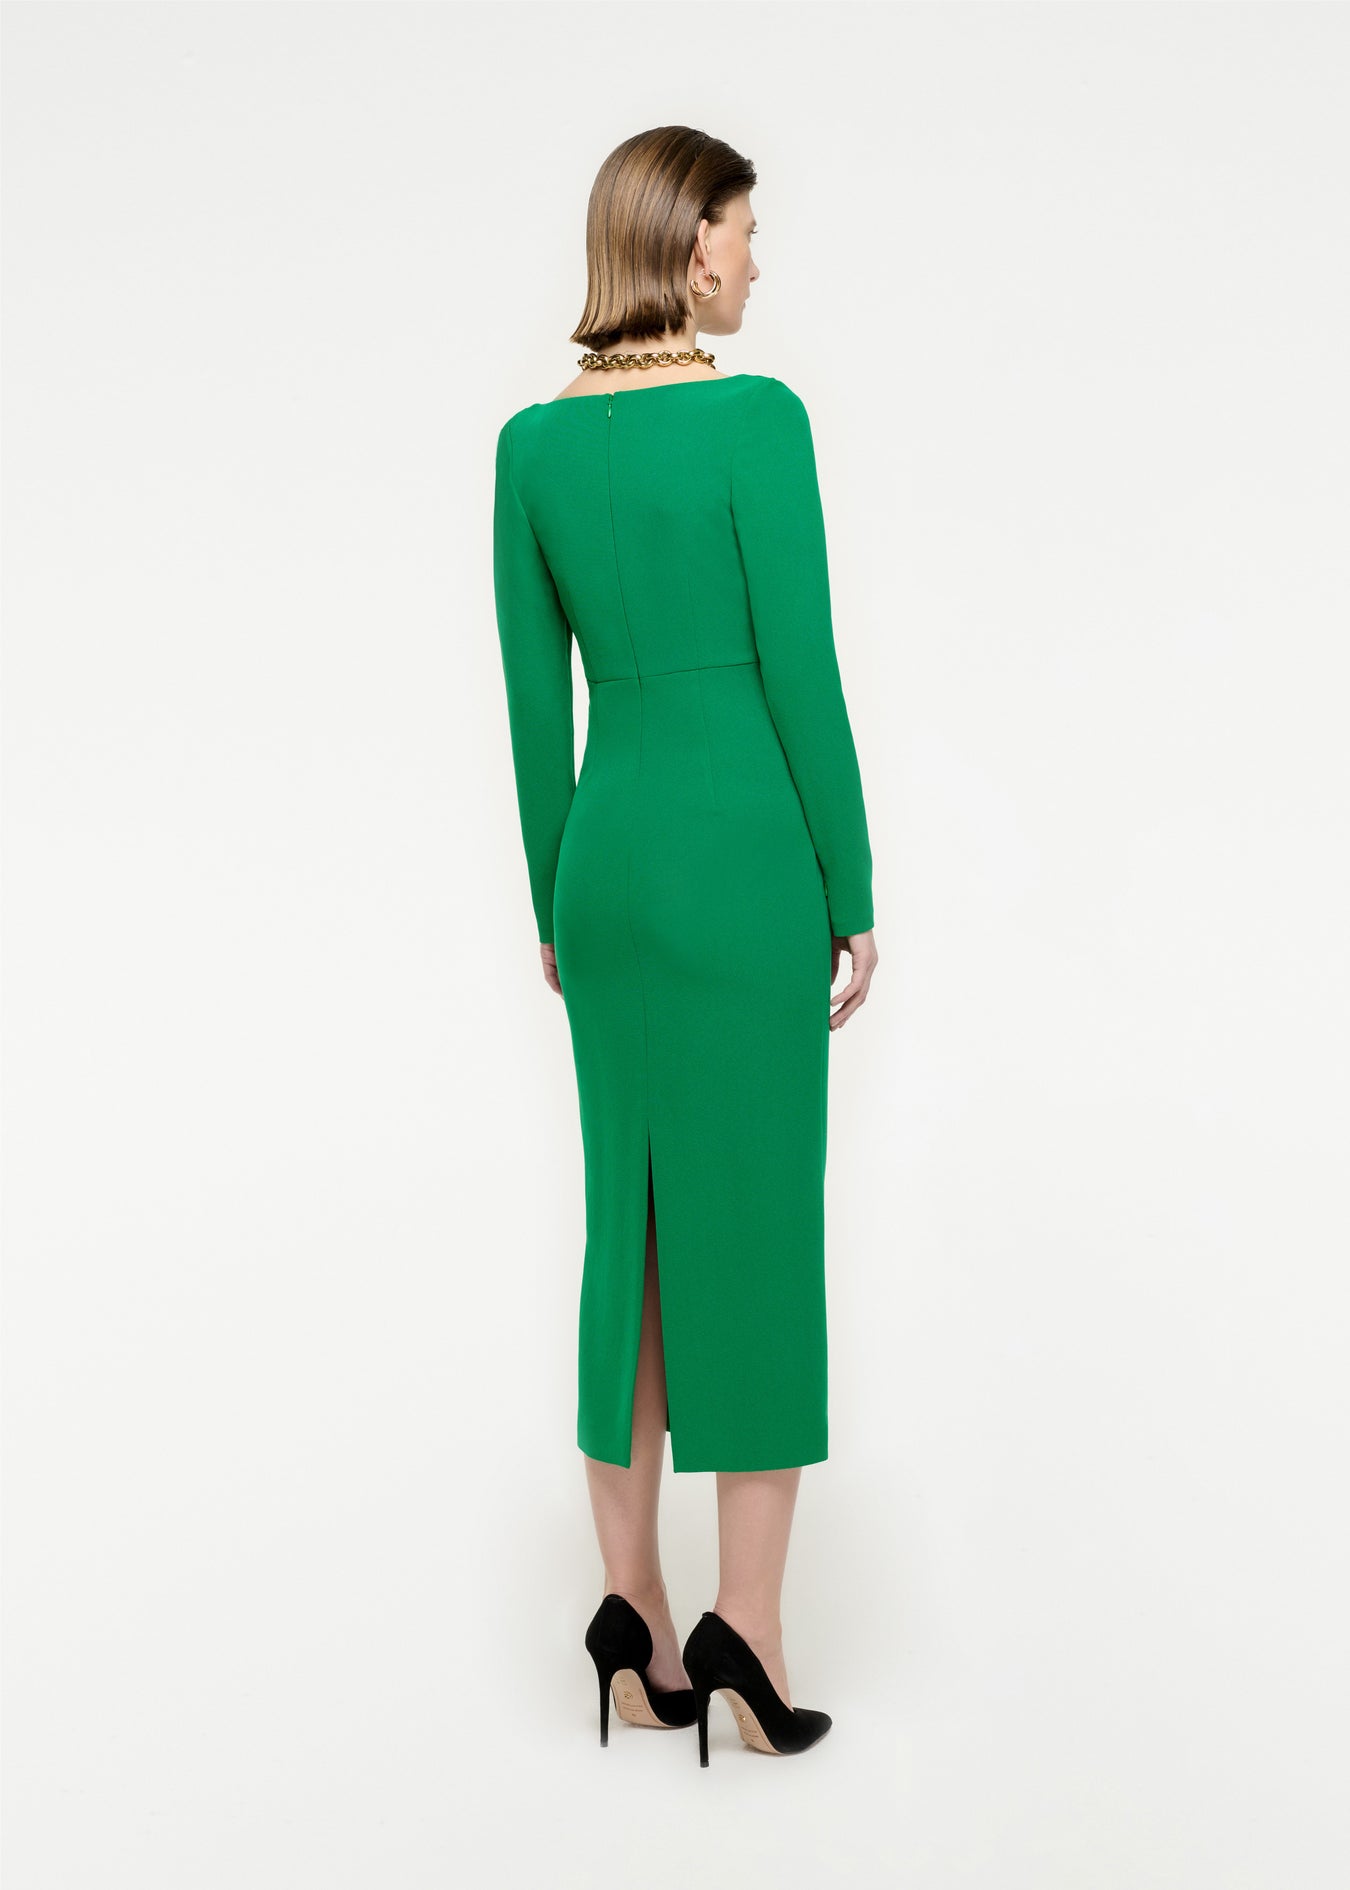 The back of a woman wearing the Long Sleeve Stretch Cady Midi Dress in Green